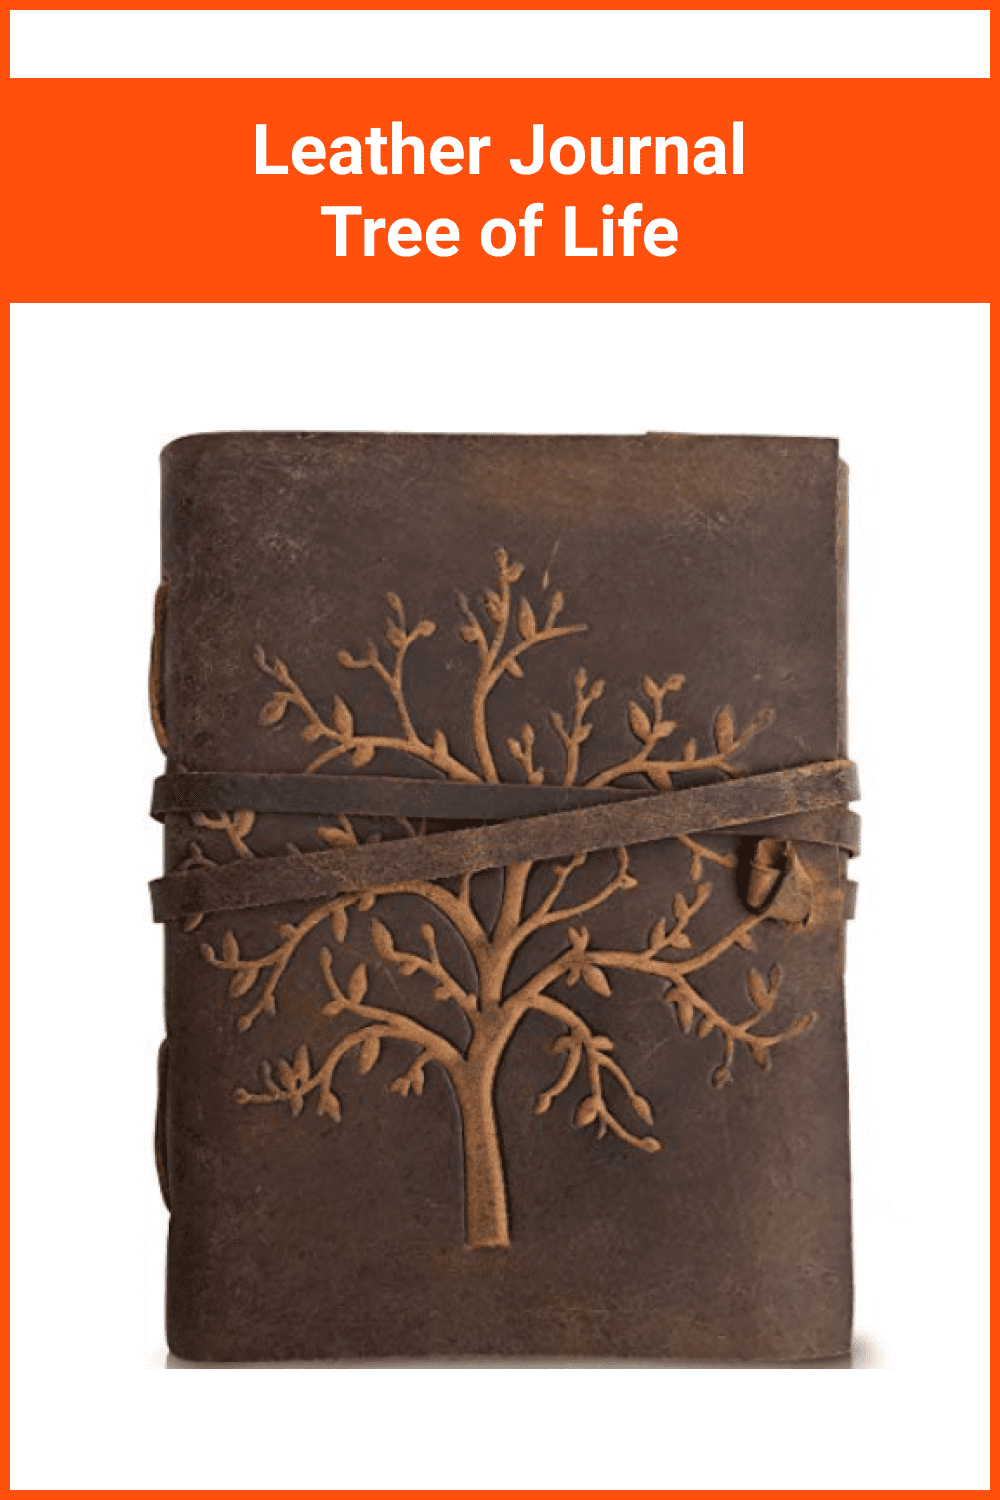 Leather Journal Tree of Life.